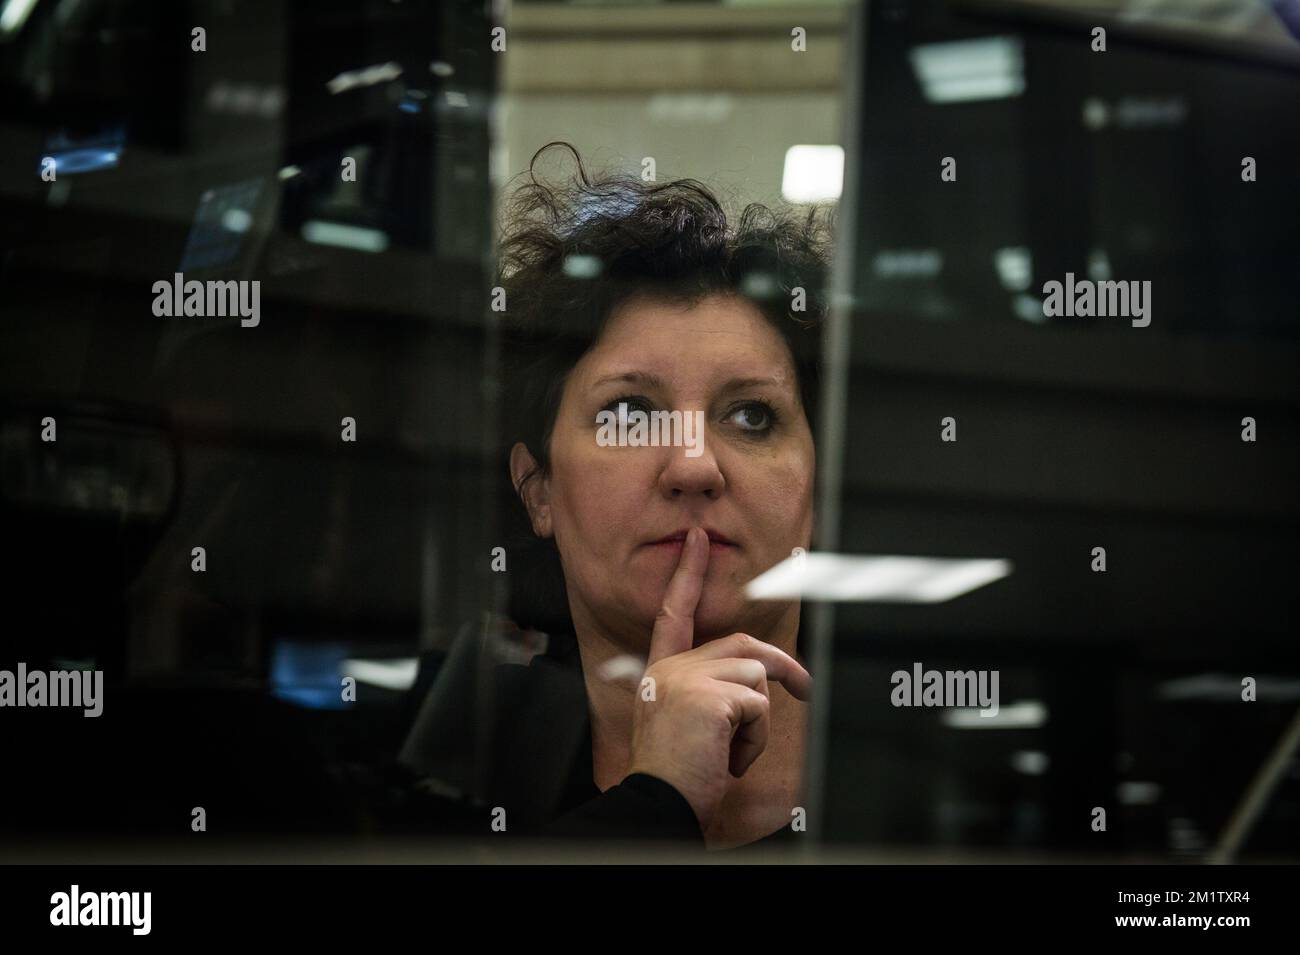 20140214 - BEVEREN-WAAS, BELGIUM: Minister of Justice Annemie Turtelboom is seen during the official opening of the new jail in Melsele, Beveren, which is one of the four new prisons planned in Belgium to enlarge the number of cells. BELGA PHOTO JONAS ROOSENS Stock Photo